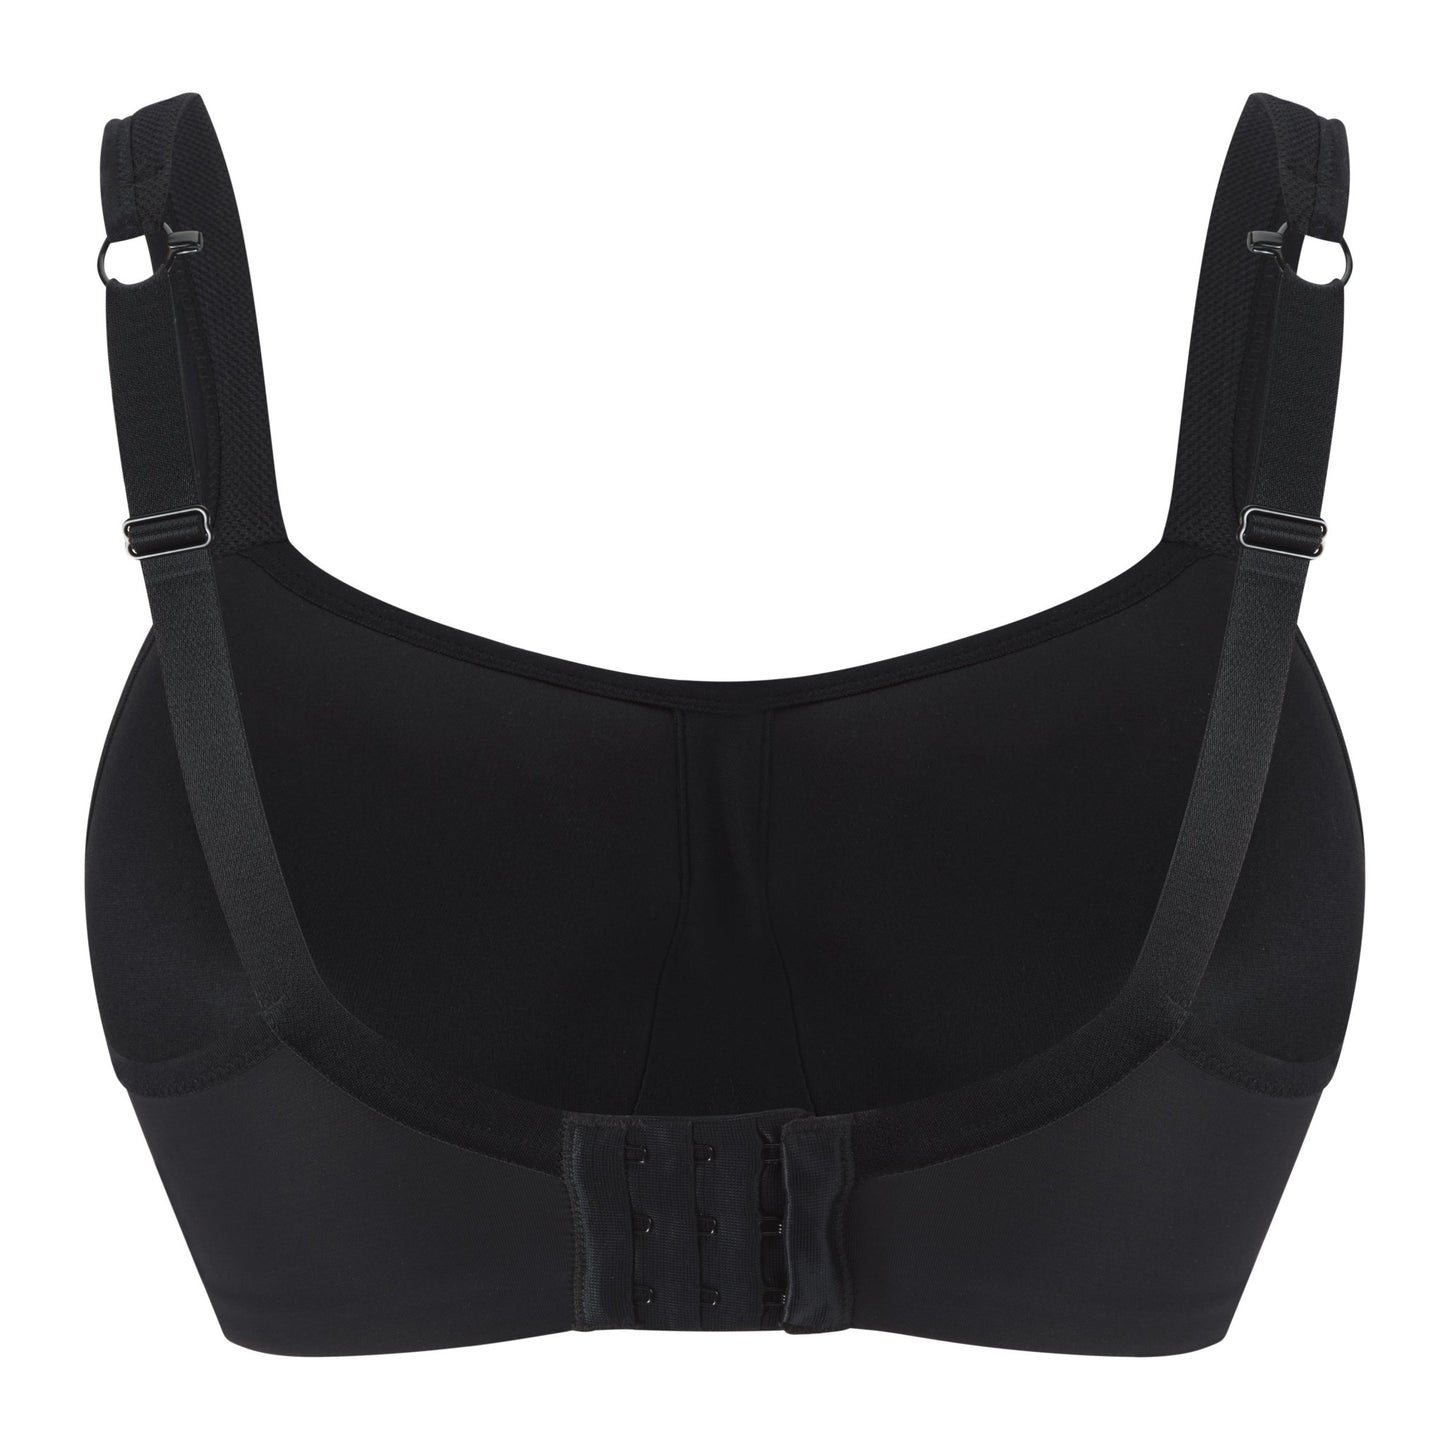 Molded Wired Sports Bra by Panache - Pinned Up Bra Lounge